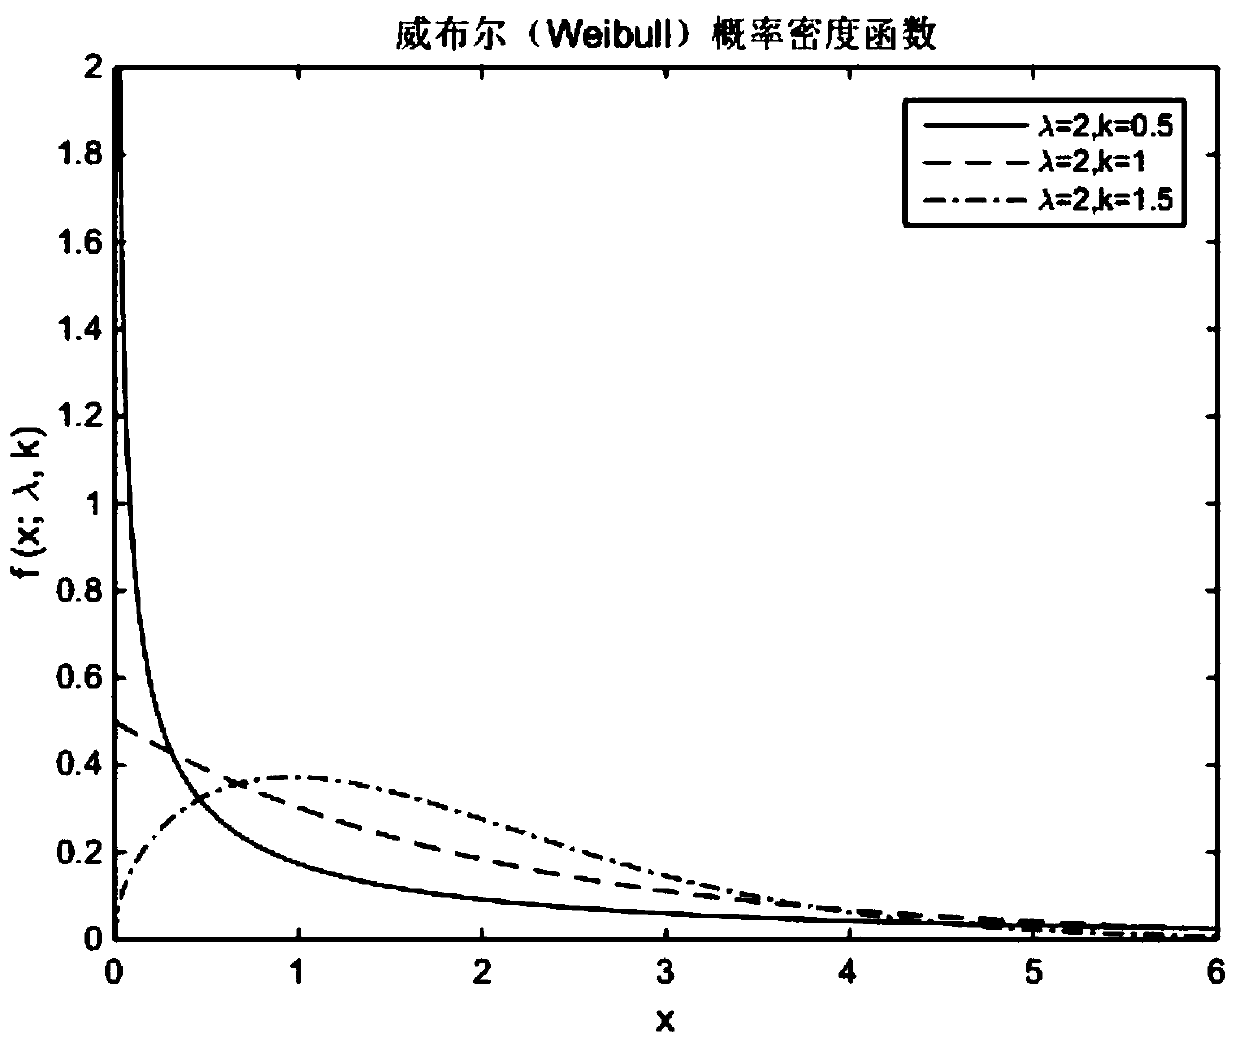 A software reliability growth model for introducing faults based on Weibull distribution